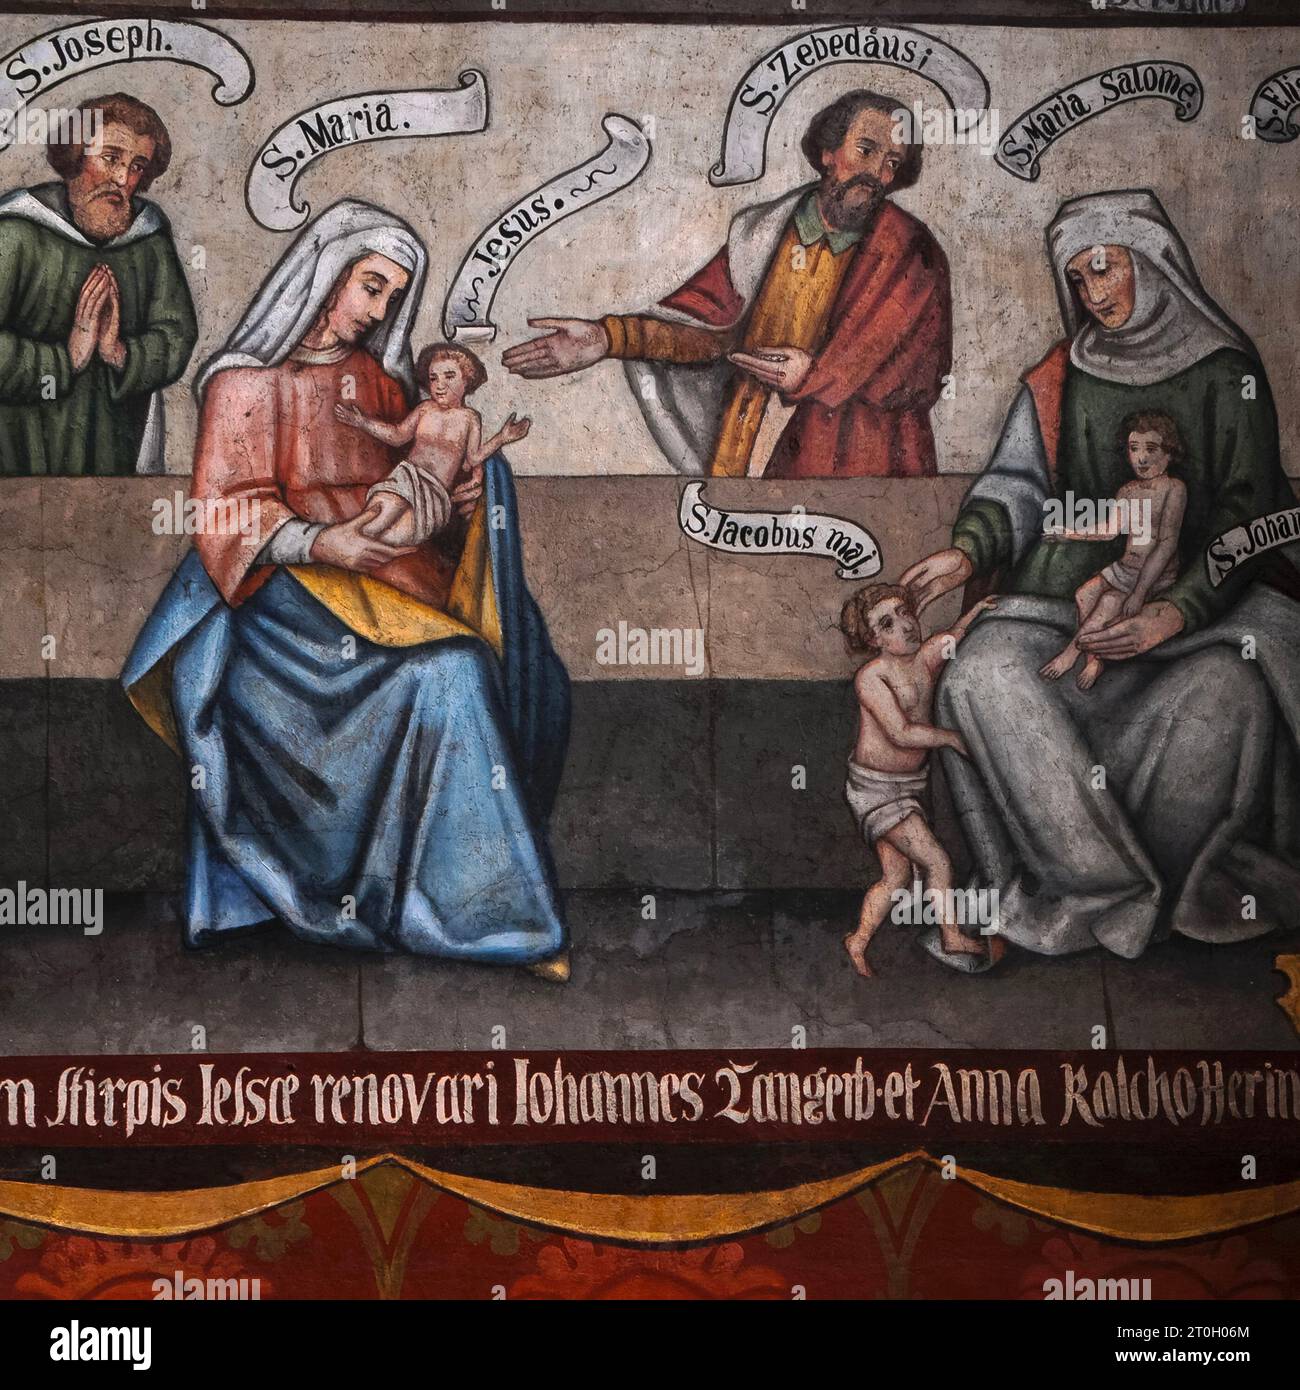 Detail of fresco, dating from the Late Gothic period and restored in the 1600s, in the north transept of the medieval Cathedral of Saint George in Limburg-an-der-Lahn, Hesse, Germany,  The Blessed Virgin Mary with the Infant Jesus is depicted with other saints.  The complete mural shows a Tree of Jesse (genealogy of Christ) above the saints. Stock Photo